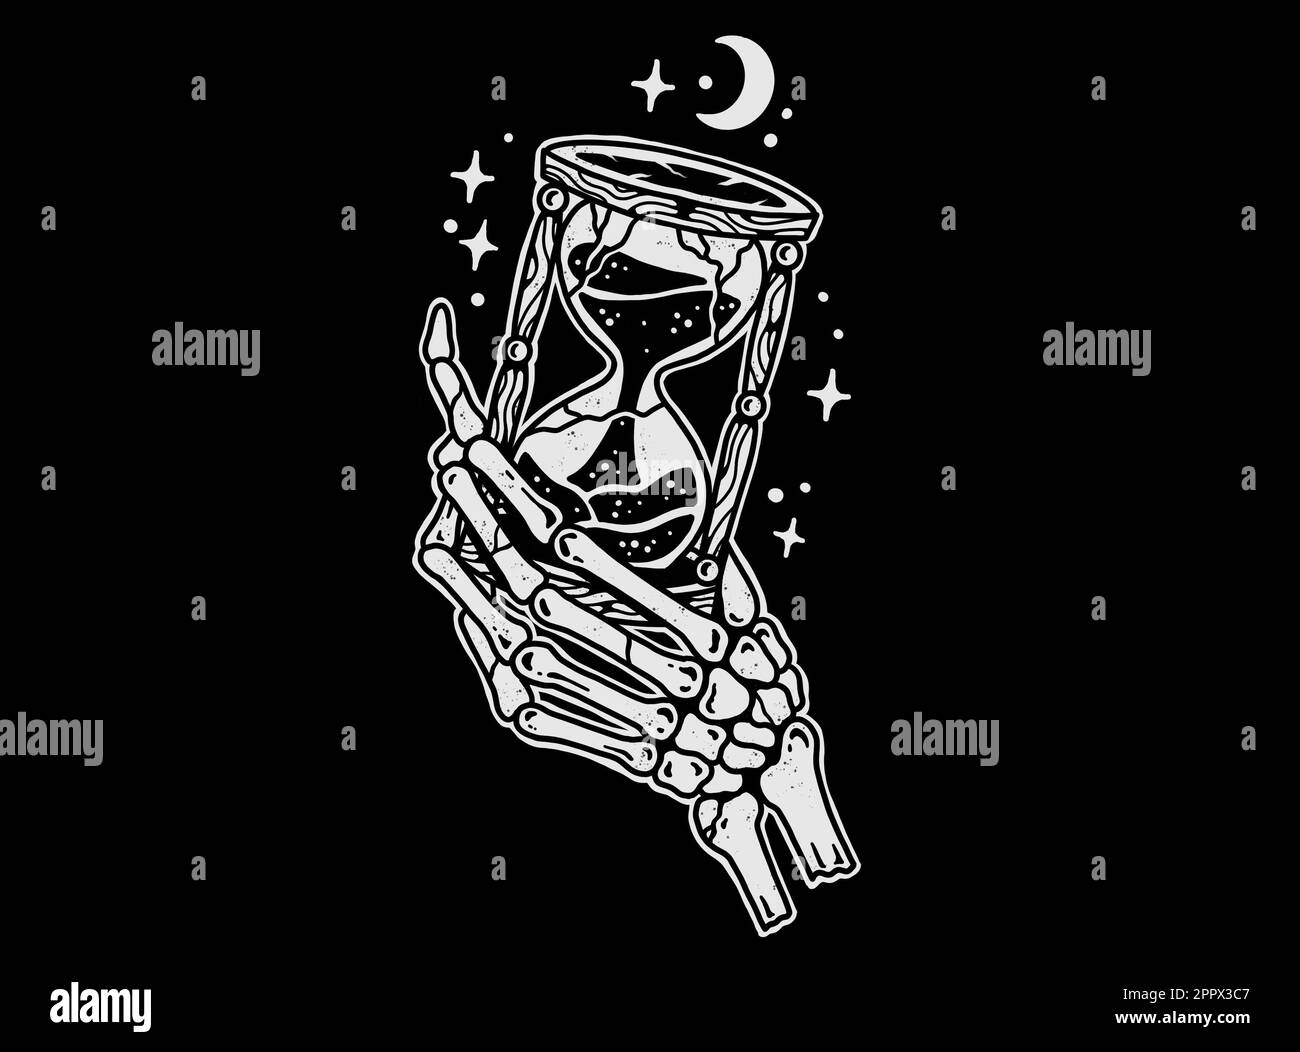 Tattoo style inspired graphic design on black background skeleton hand holding hour glass Stock Photo